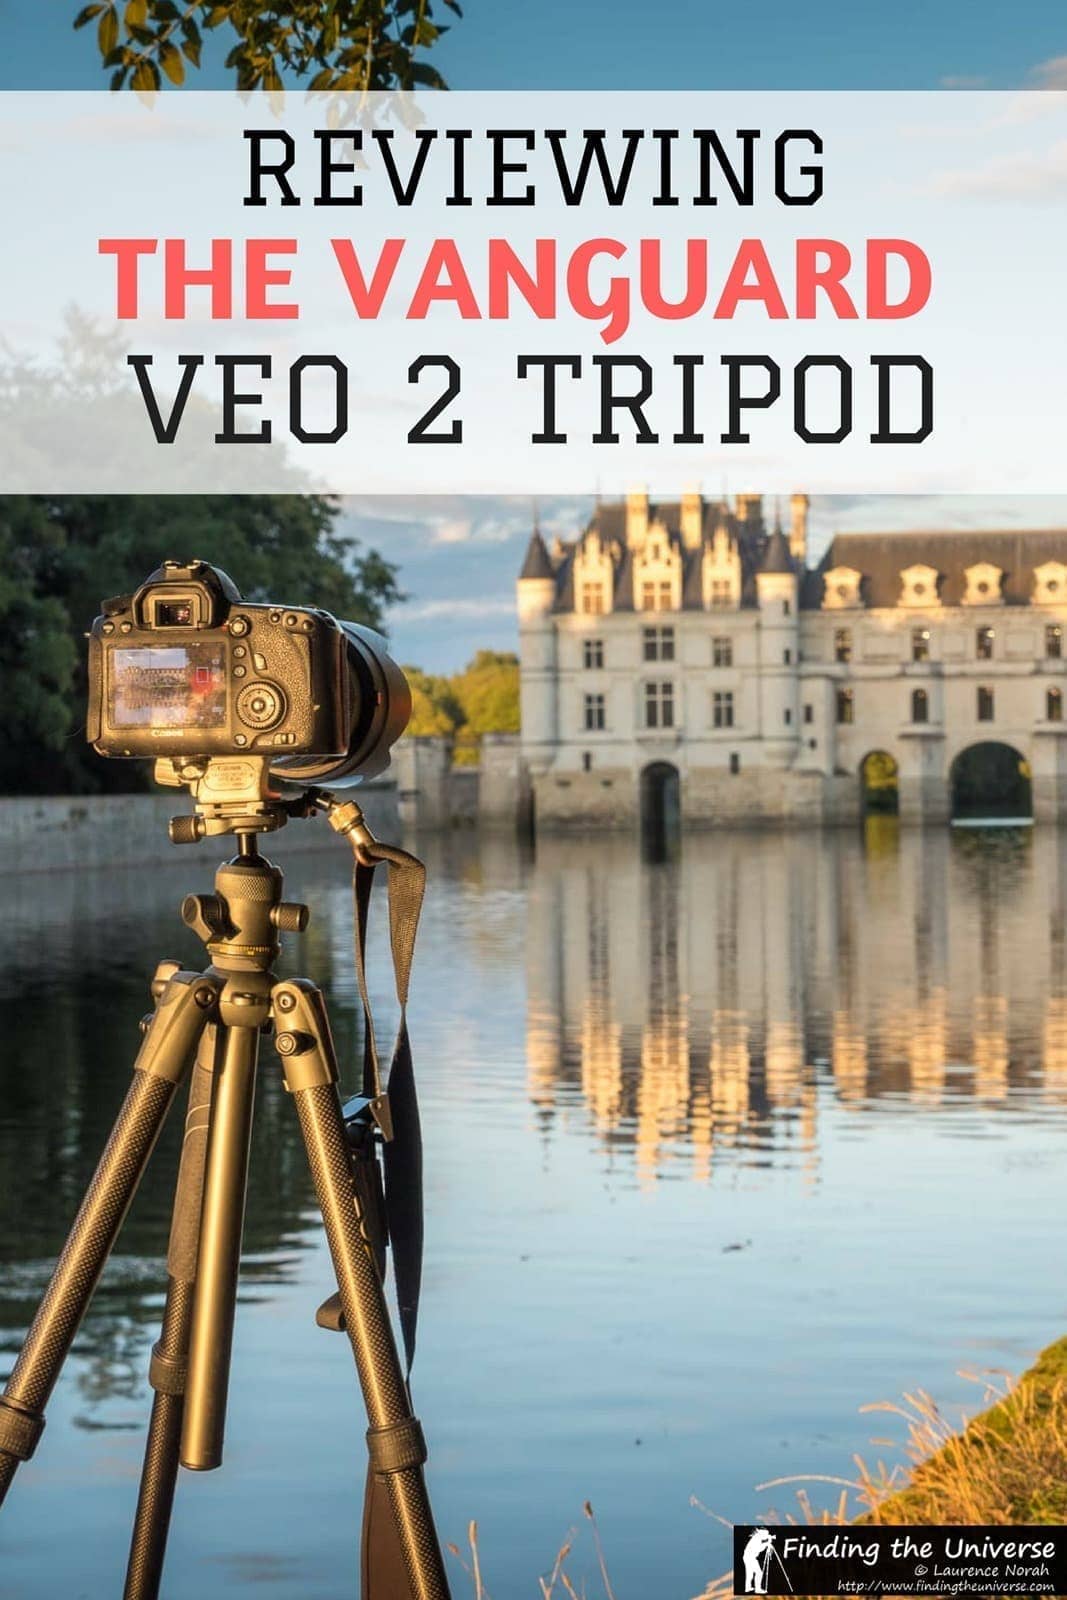 Detailed Vanguard VEO 2 265 tripod review from a travel photographer's perspective, with information on what's new in the latest line of travel tripods from Vanguard #photography #tripod #travel 